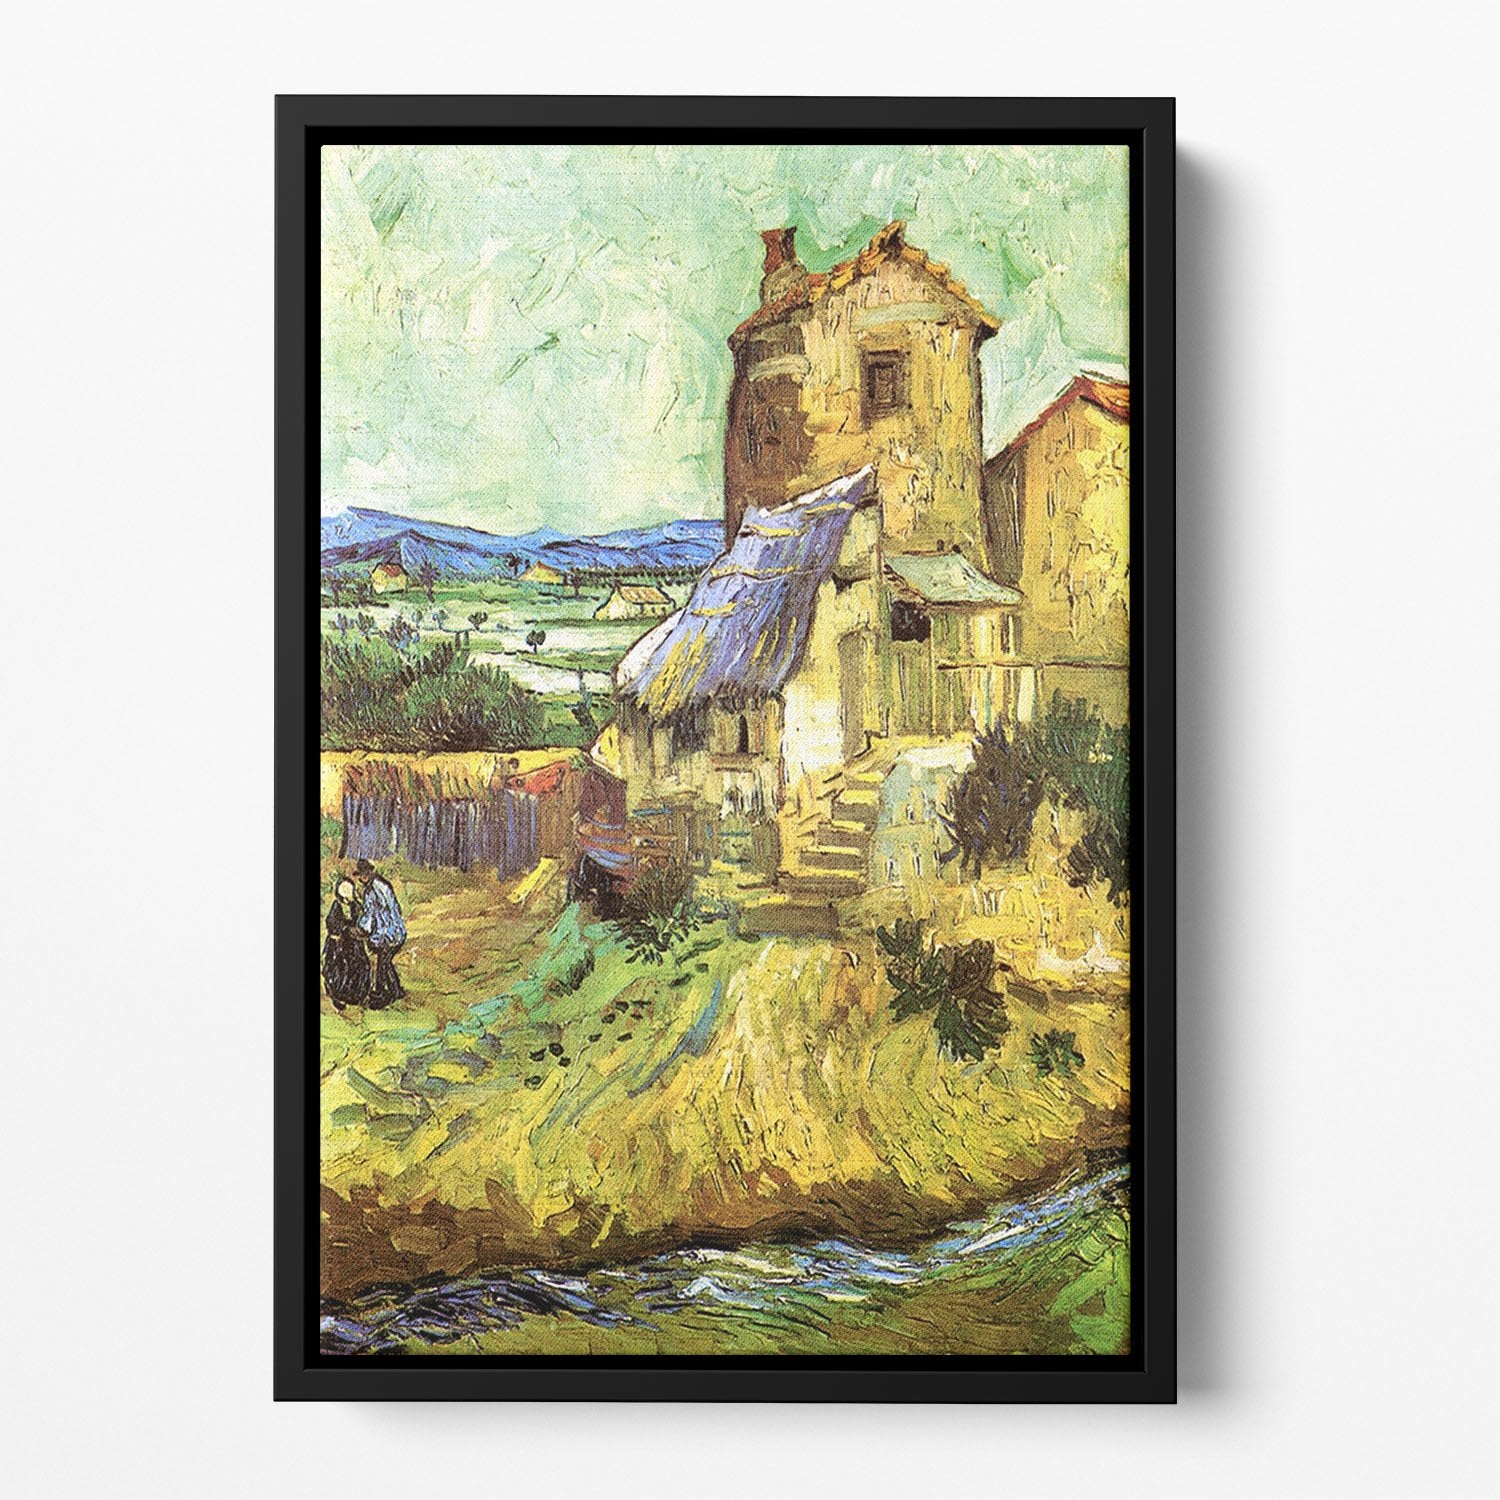 The Old Mill by Van Gogh Floating Framed Canvas